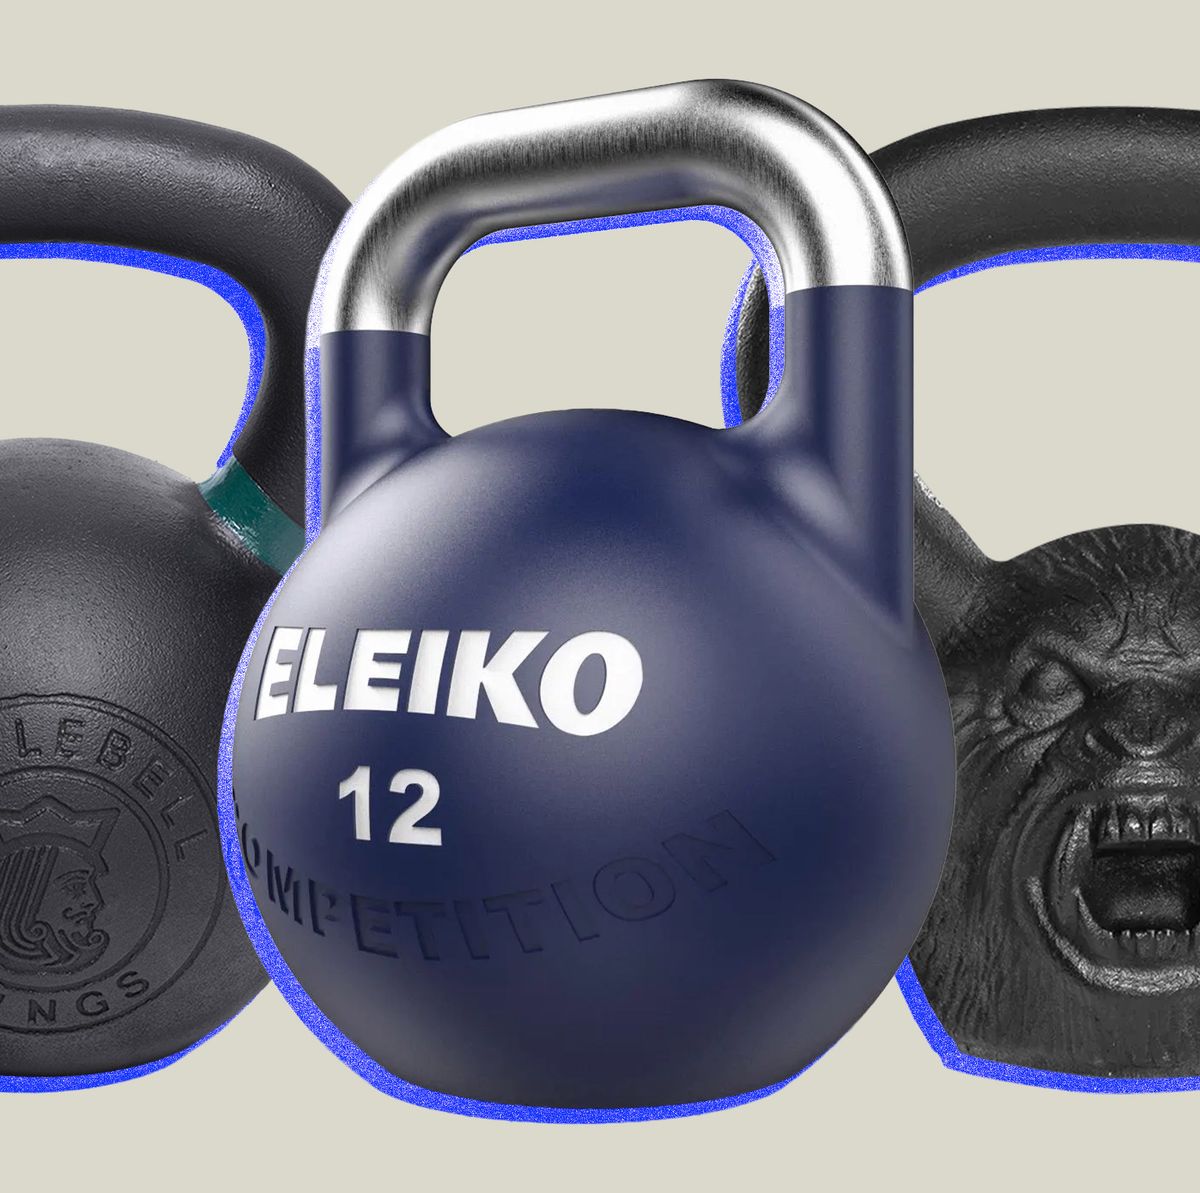 Start a New Workout Routine with the Kettlebells